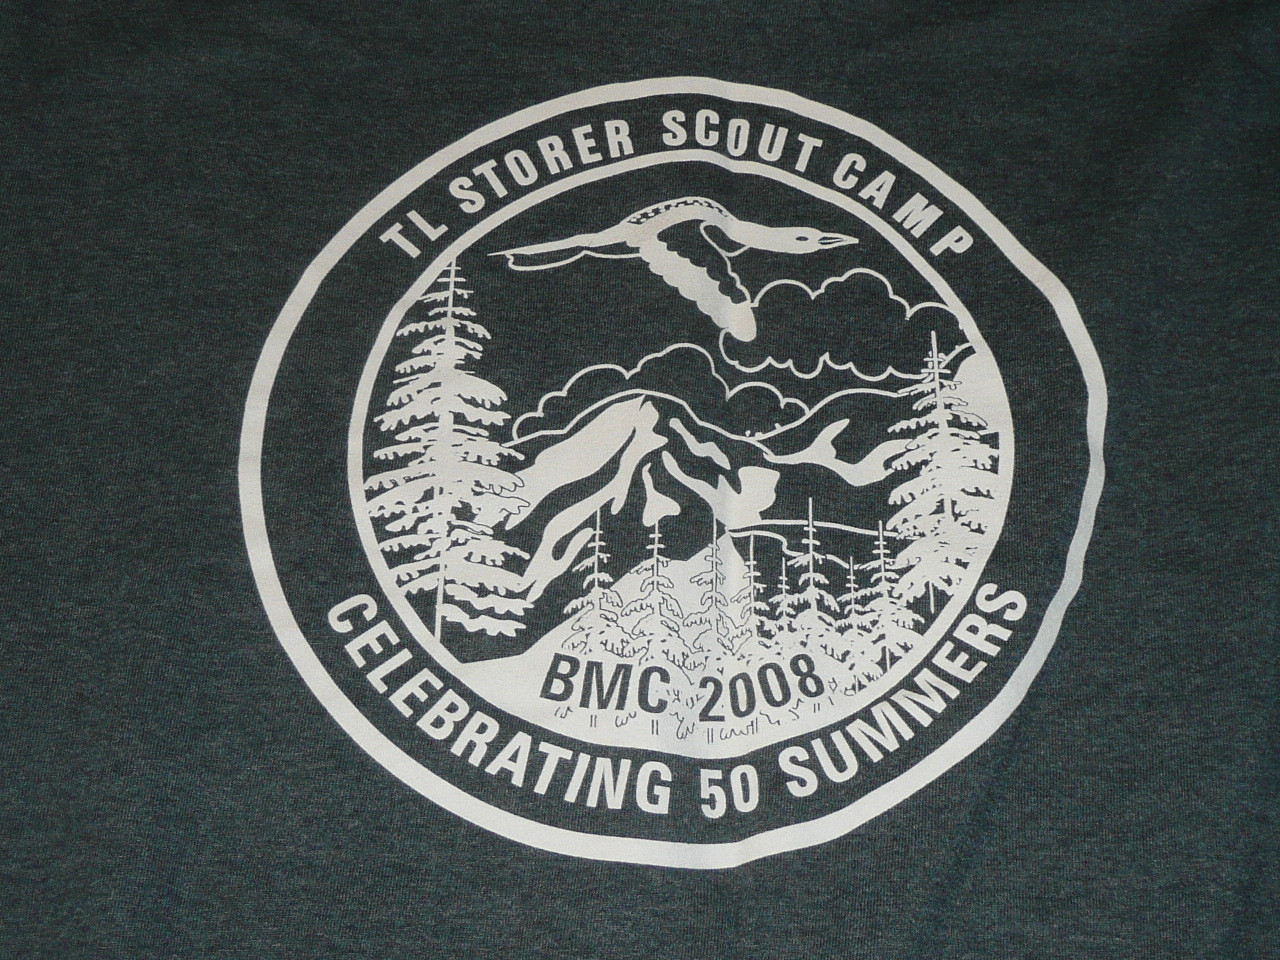 2008 TL Storer Scout Camp Tee Shirt, Blue Mountain Council, size Large, Unused